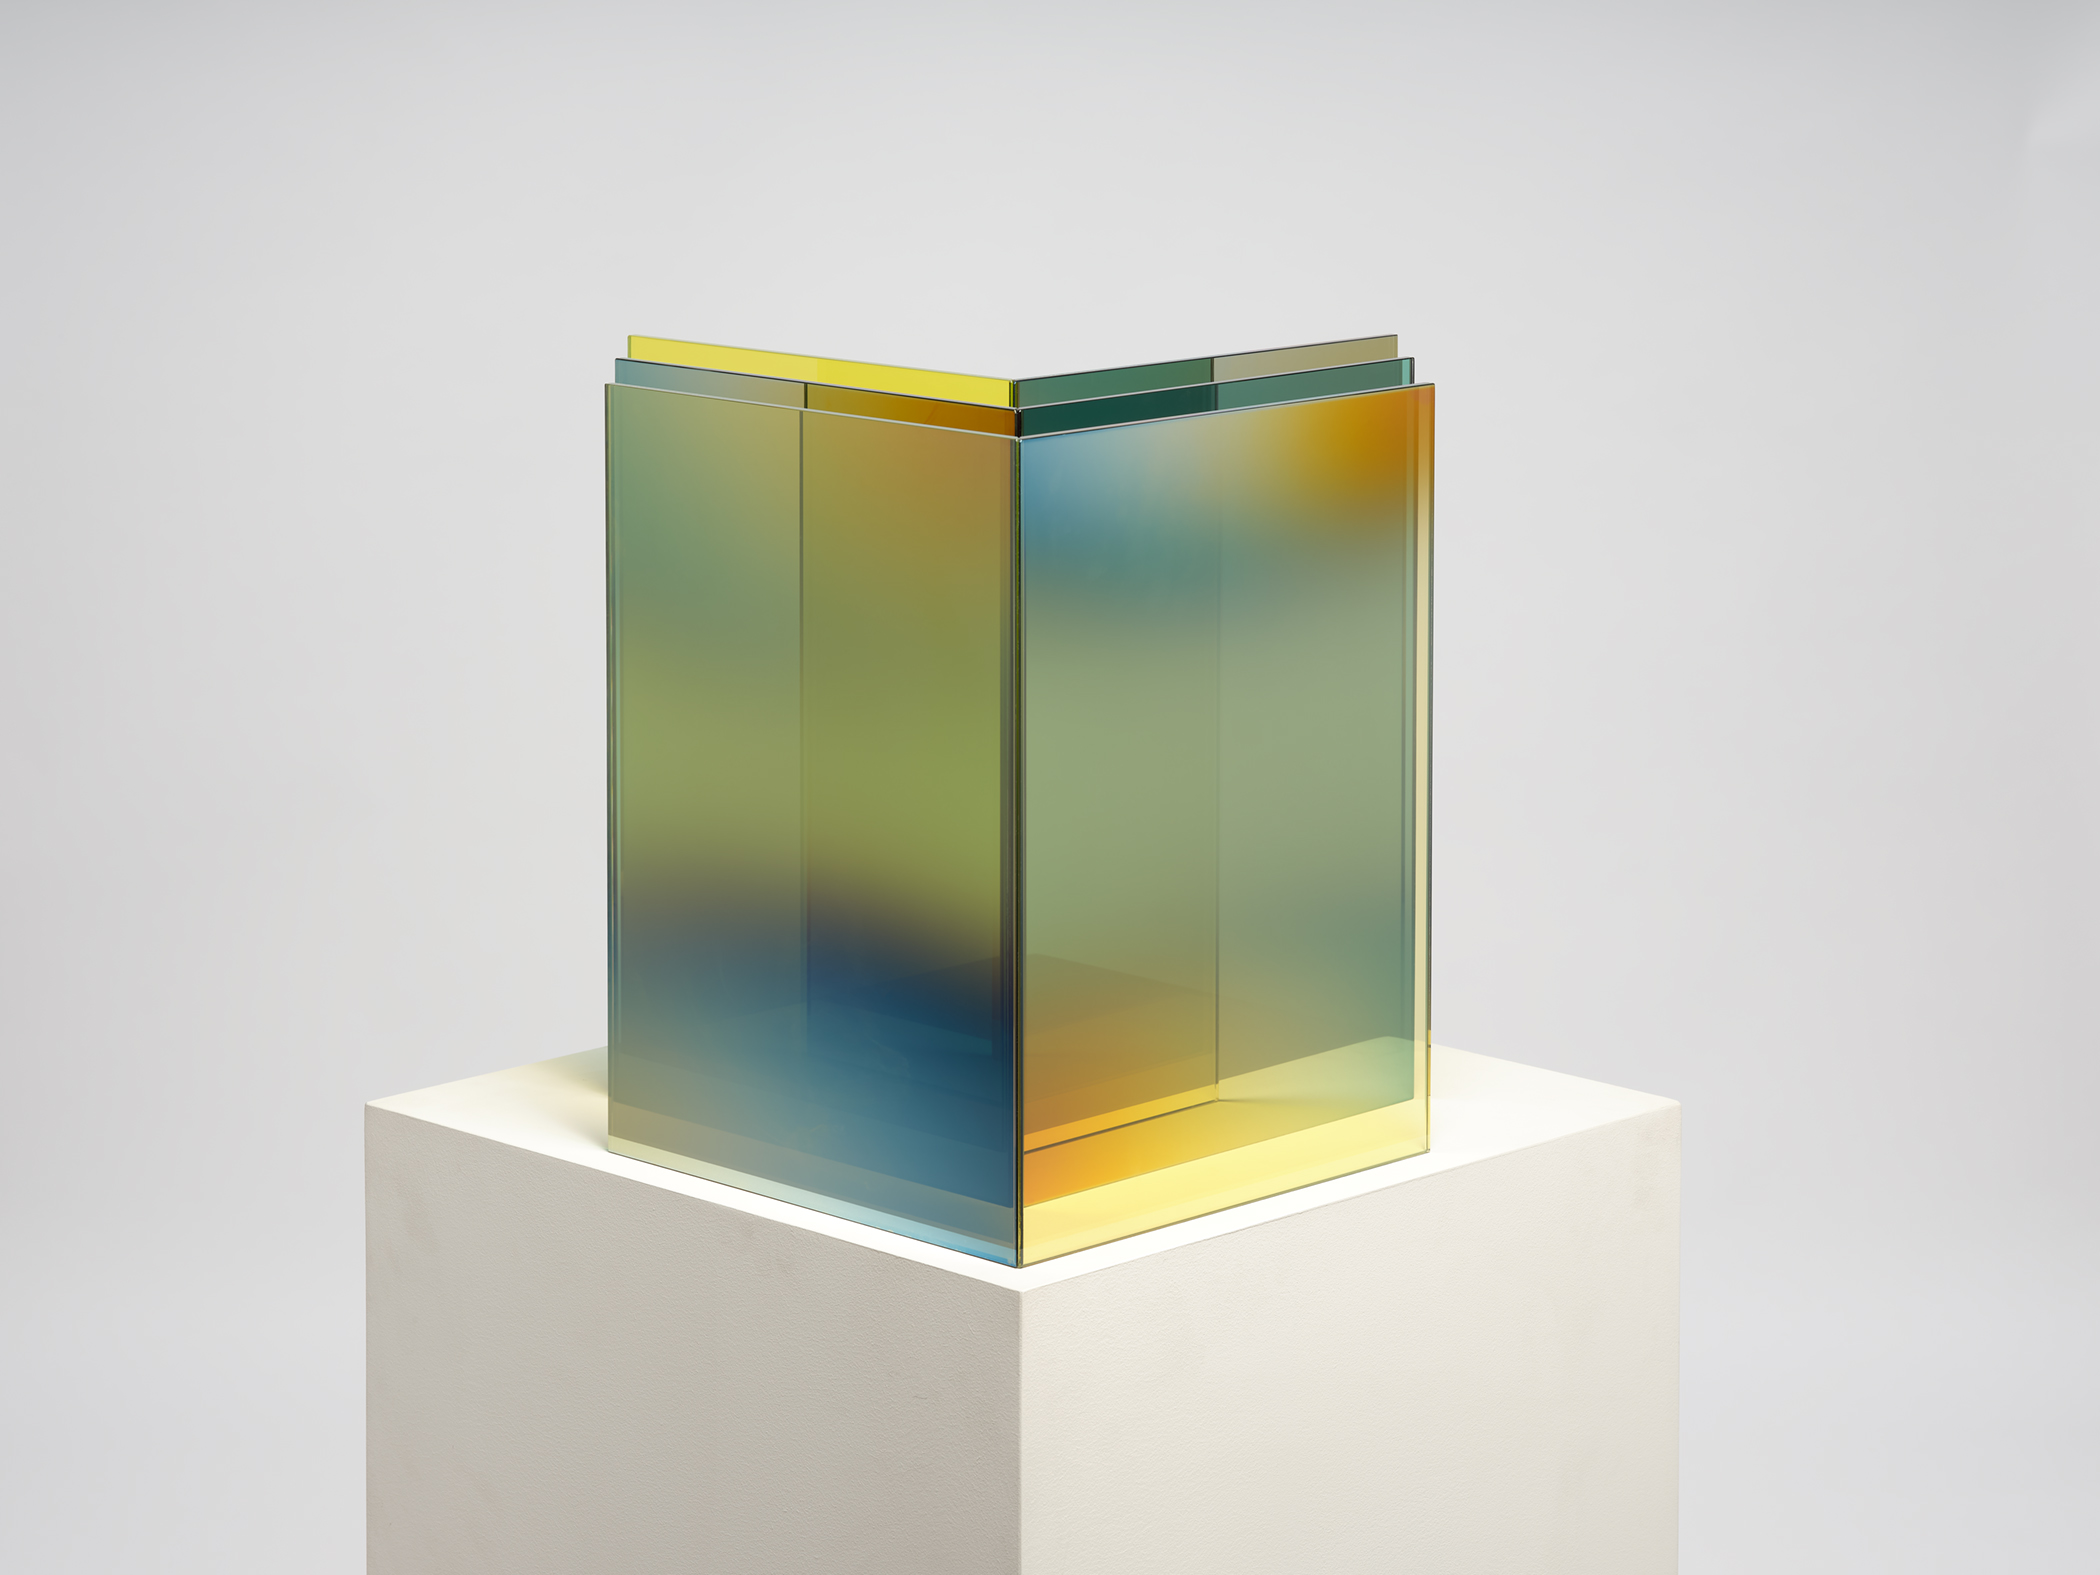 Larry Bell, Untitled (2 x 3), 2021. Laminated glass coated with Inconel, SIO and Quartz, 16 x 19 x 19 in. Larry Bell Studio, Courtesy of the artist and Anthony Meier, Mill Valley.